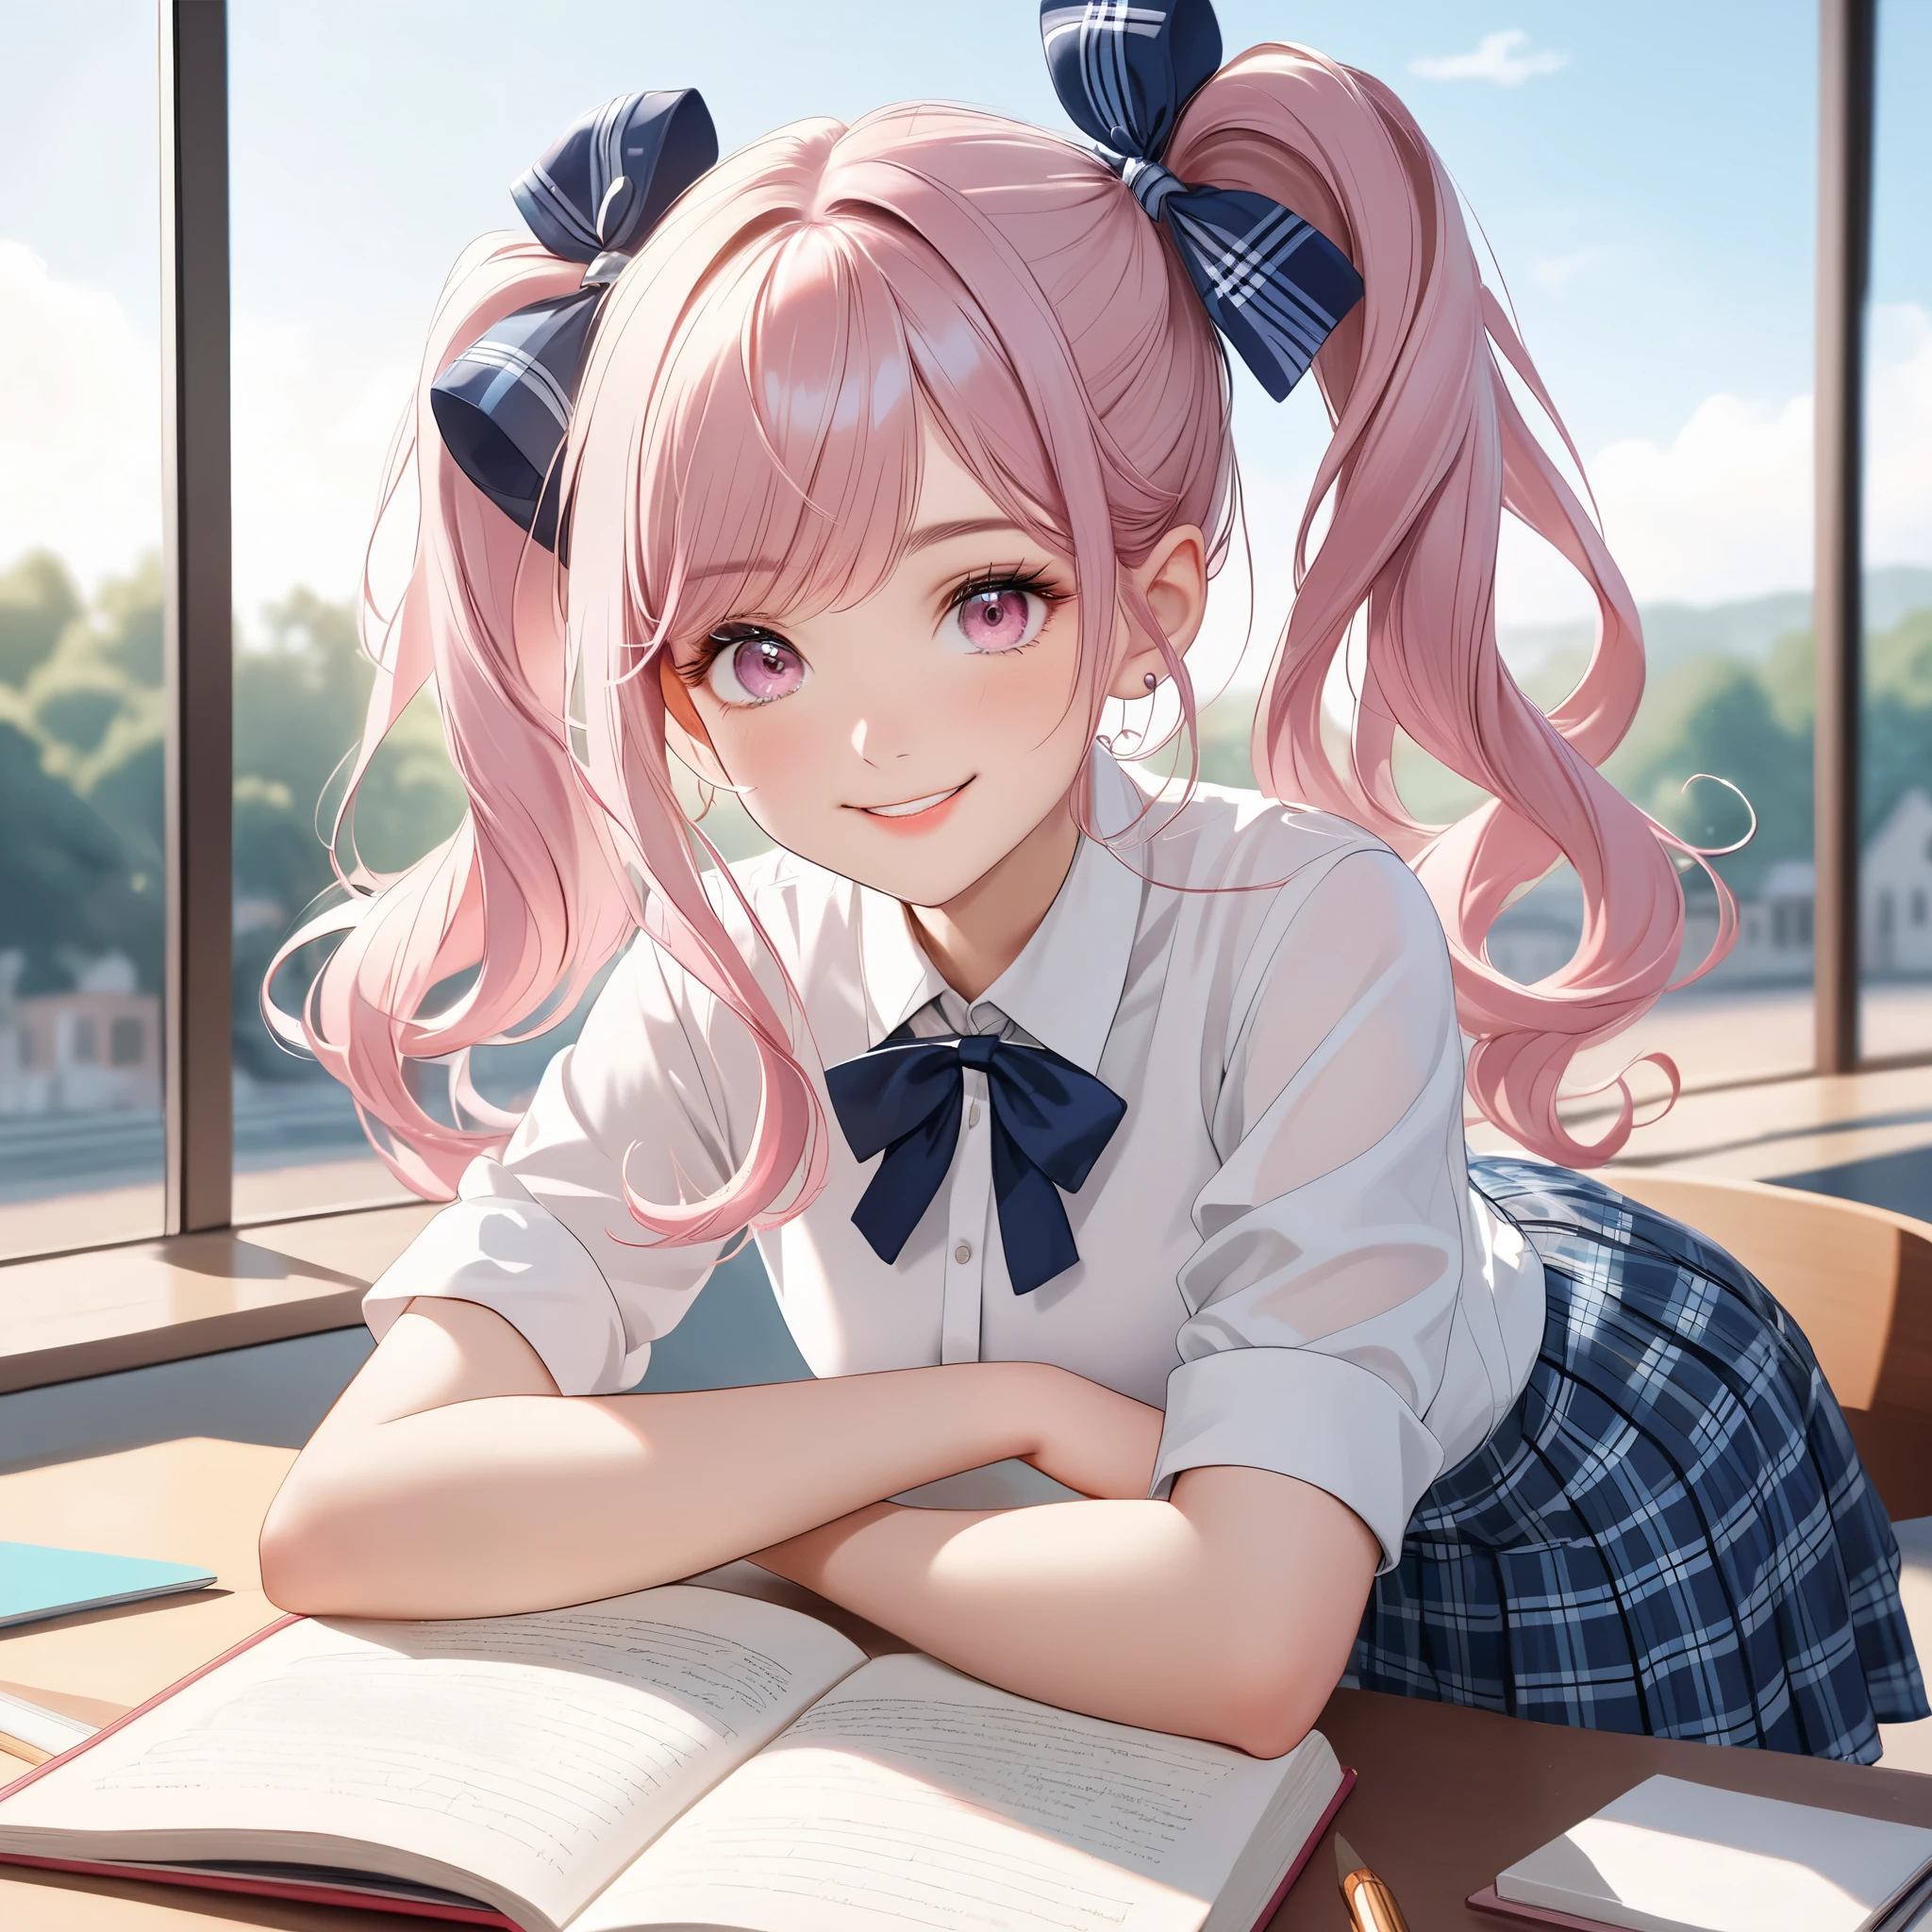 (8K, masutepiece, Highest Quality, Best Quality, Official art, Breathtaking beauty and aesthetics, A highly detailed, The best masterpiece in history that exceeds limits, Breathtaking and beautiful lighting:1.2), (1 Absolute Beautiful Girl, Solo), (sixteen years old), (beautiful detailed face), (shiny white skin), (beautiful detailed pink twin tails hair, Bangs:1.3), (beautiful detailed adolable drooing pink eyes:1.3), (high school uniform), (white shirt, pastel blue Tartan Plaid pleated skirt, patsel blue ribbon:1.3), (Beautiful big bust:1.3), (happy smile, Beautiful smile, Gentle smile, cute smile, innocent smile:1.2), (Attractive, amazing, Beautiful, Elegant, Luxurious, magnifica, Happy, Eye-catching, the ultimate beauty, Supreme Beauty, Superlative beauty, Elegant, Graceful, Everyone loves it, Beauty that fascinates everyone, Healed, The highest level of complete beauty, cute like an idol, Stylish like a fashion model, Goddess-like grace, Be loved, cute little, adolable), Look at the camera, cute pose, breathtaking scenery, (ultra detailed realistic Beautiful high school, studying, morning:1.3),